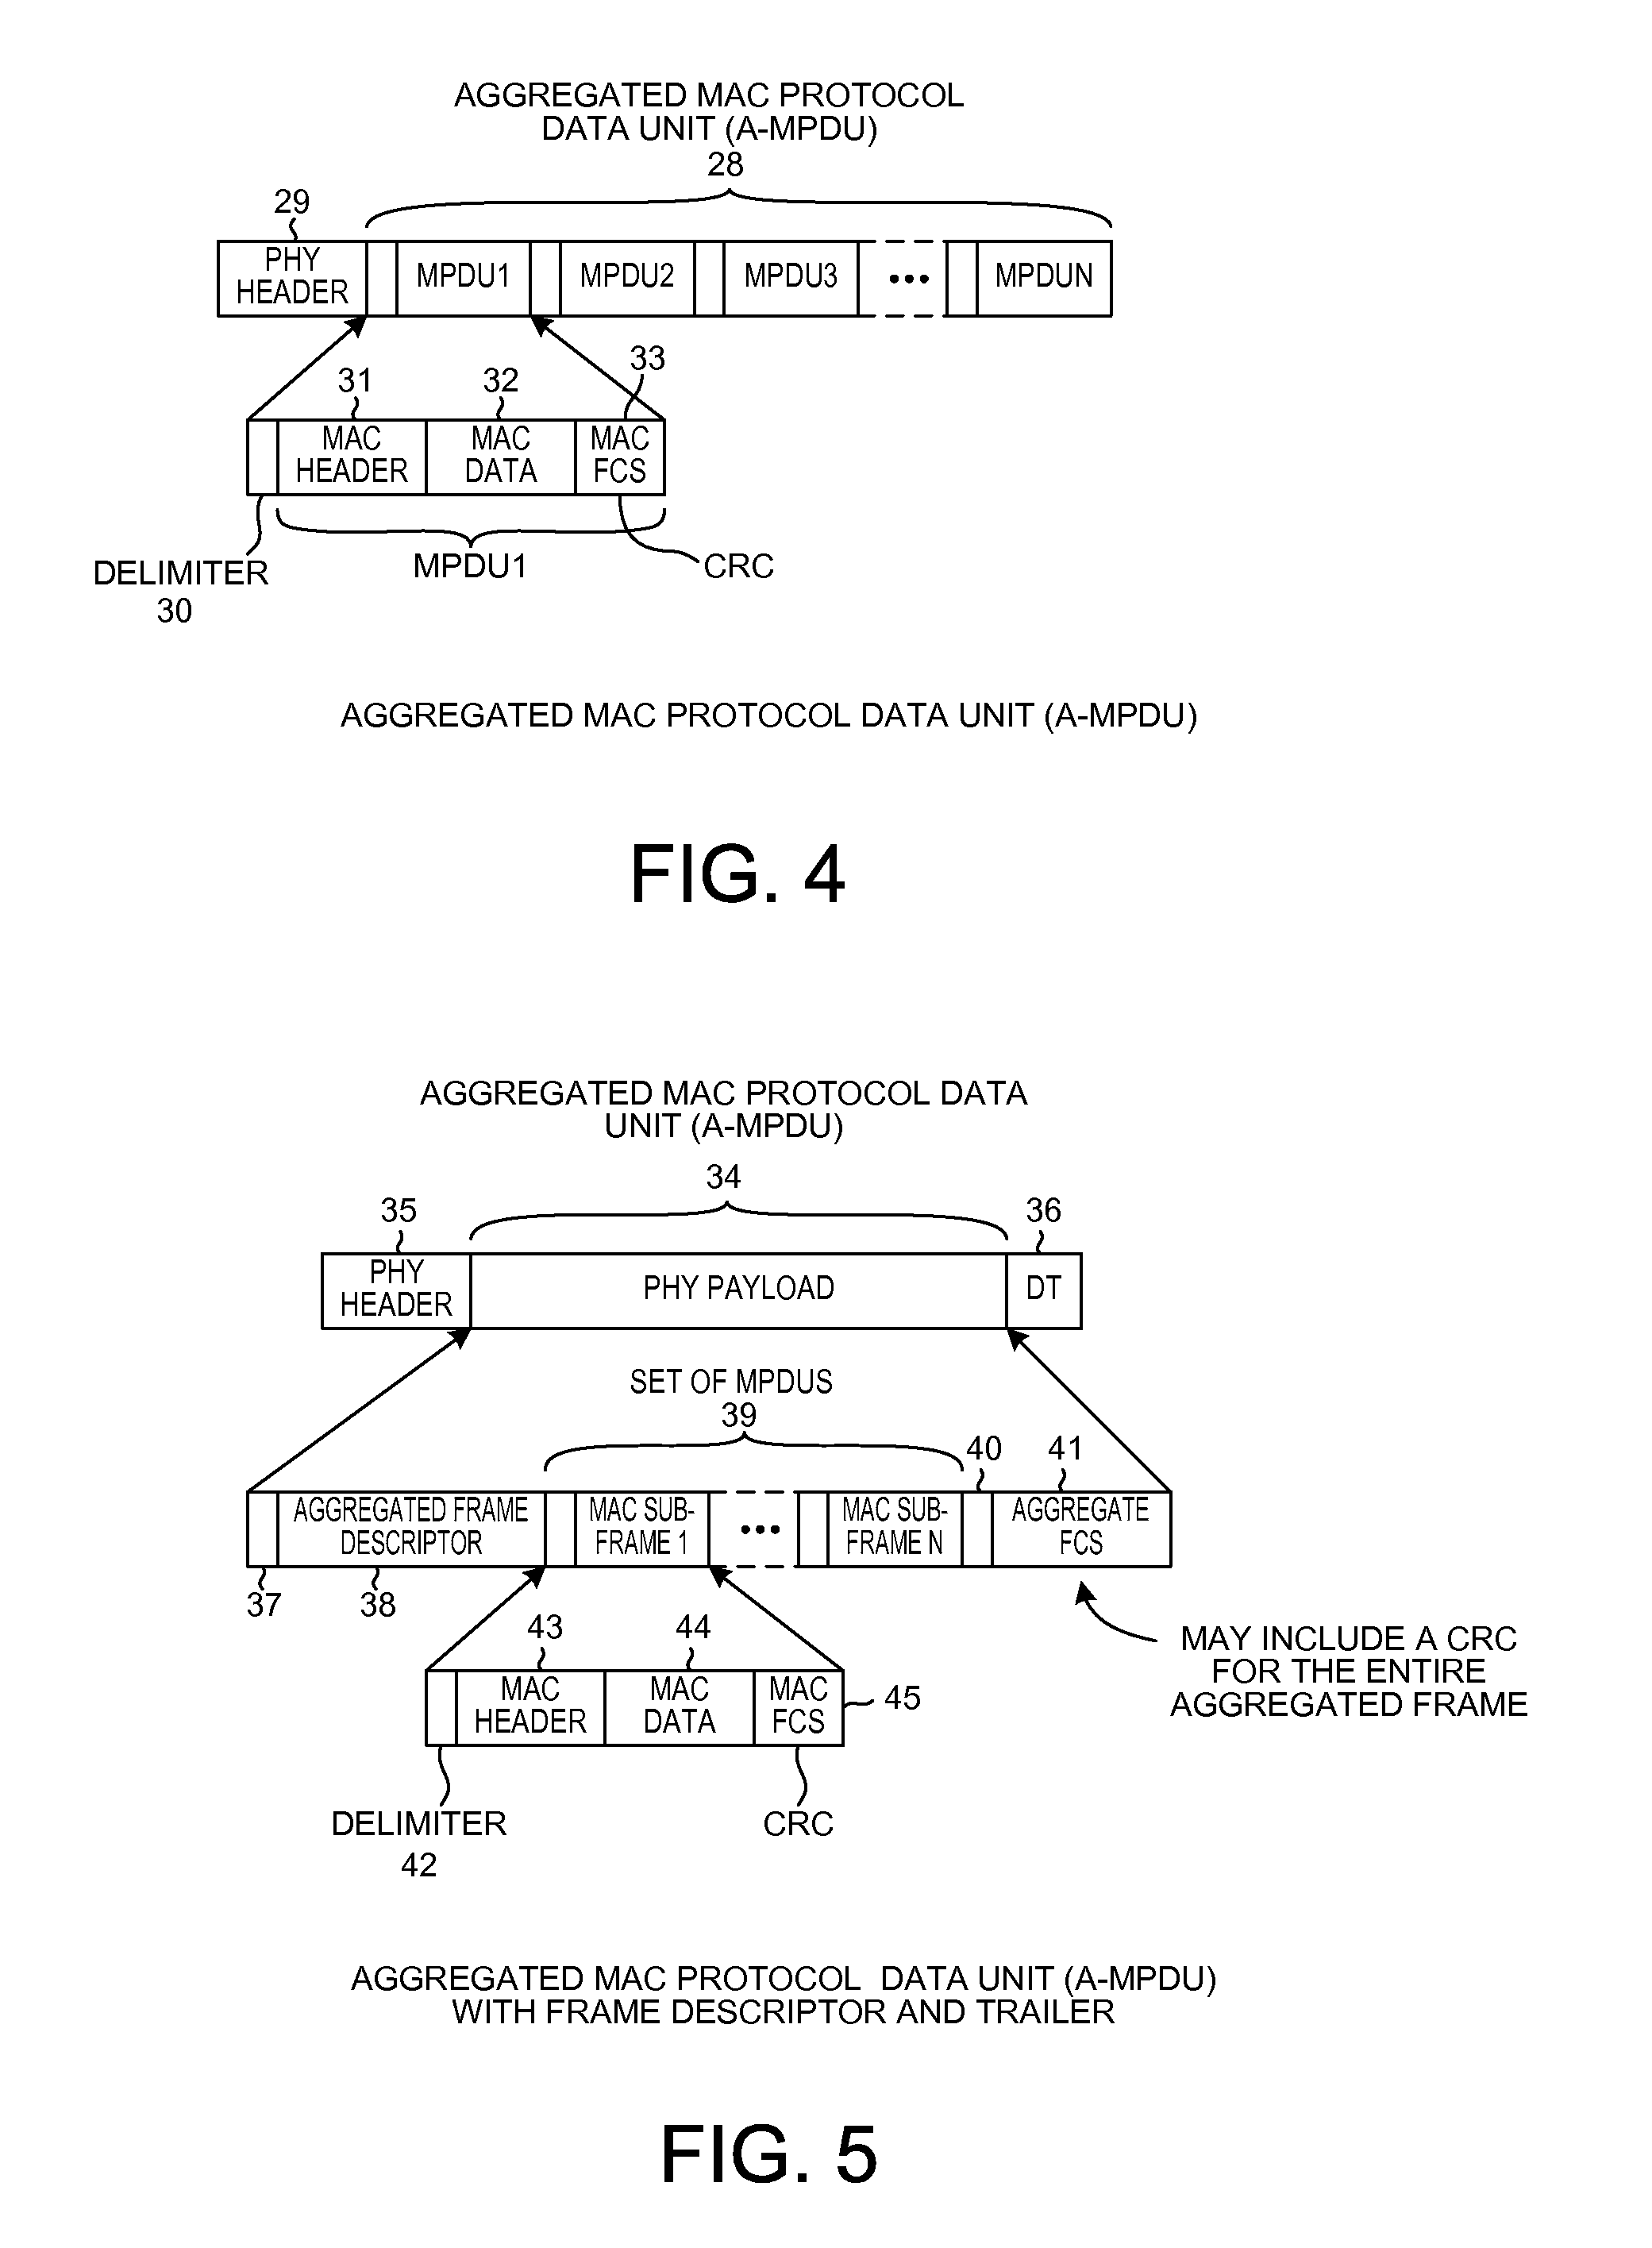 Packet-level erasure protection coding in aggregated packet transmissions